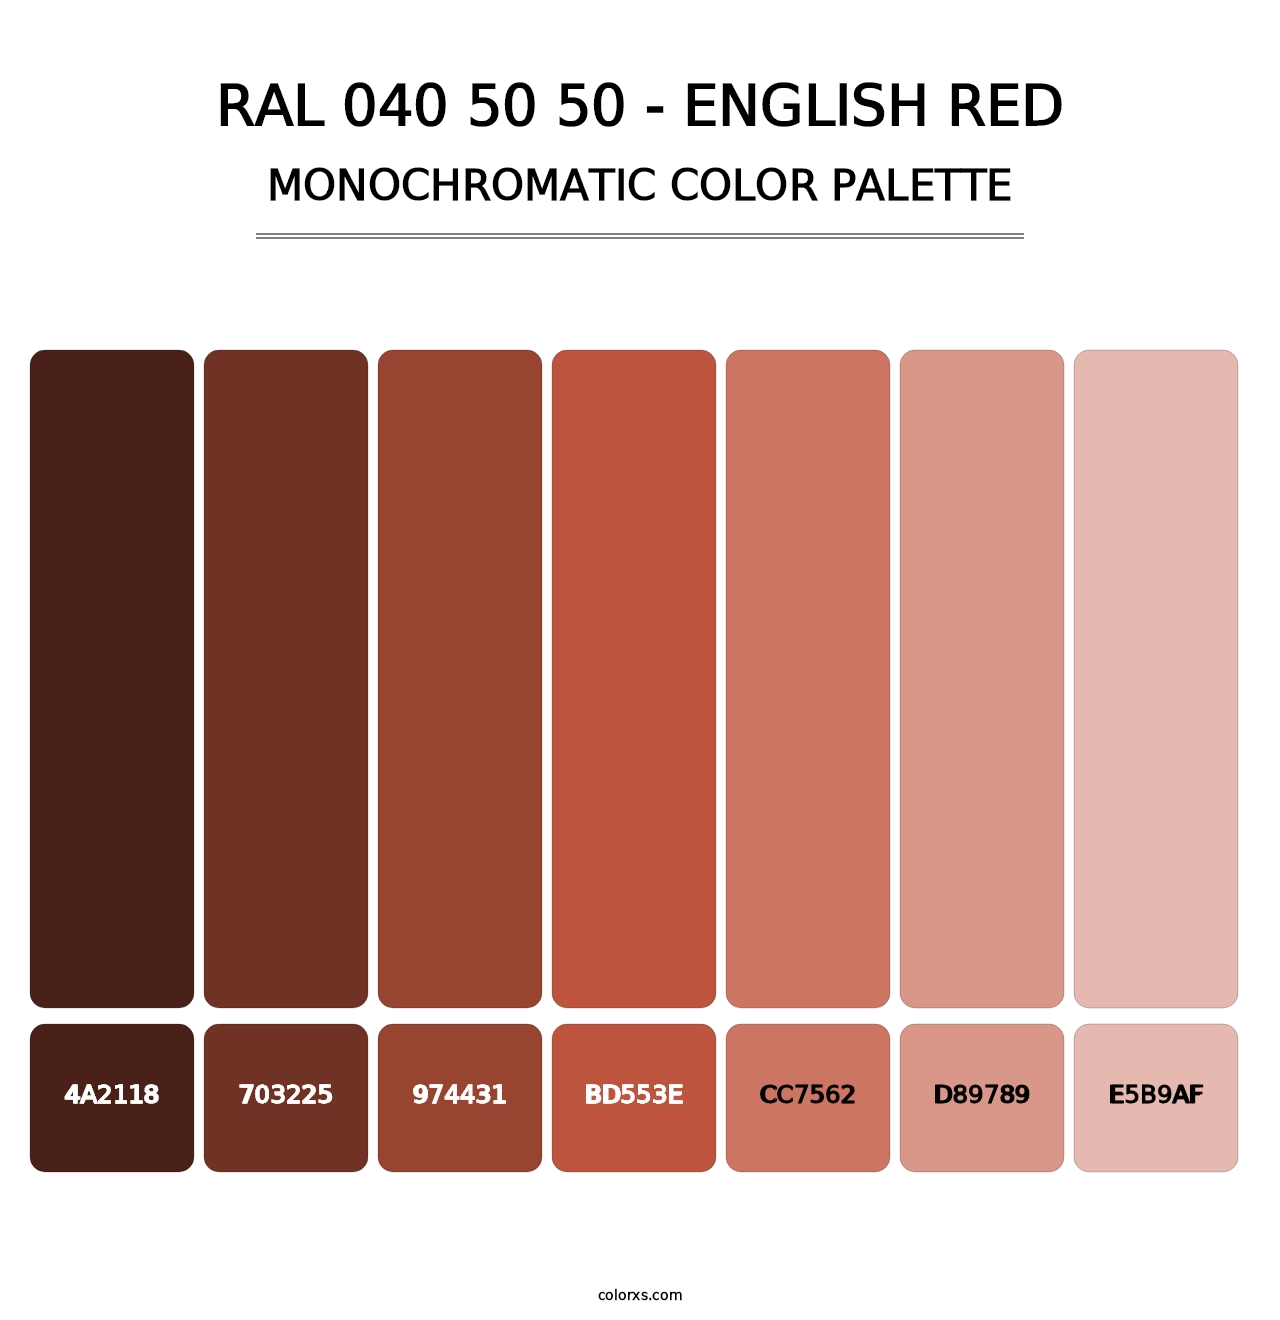 RAL 040 50 50 - English Red - Monochromatic Color Palette